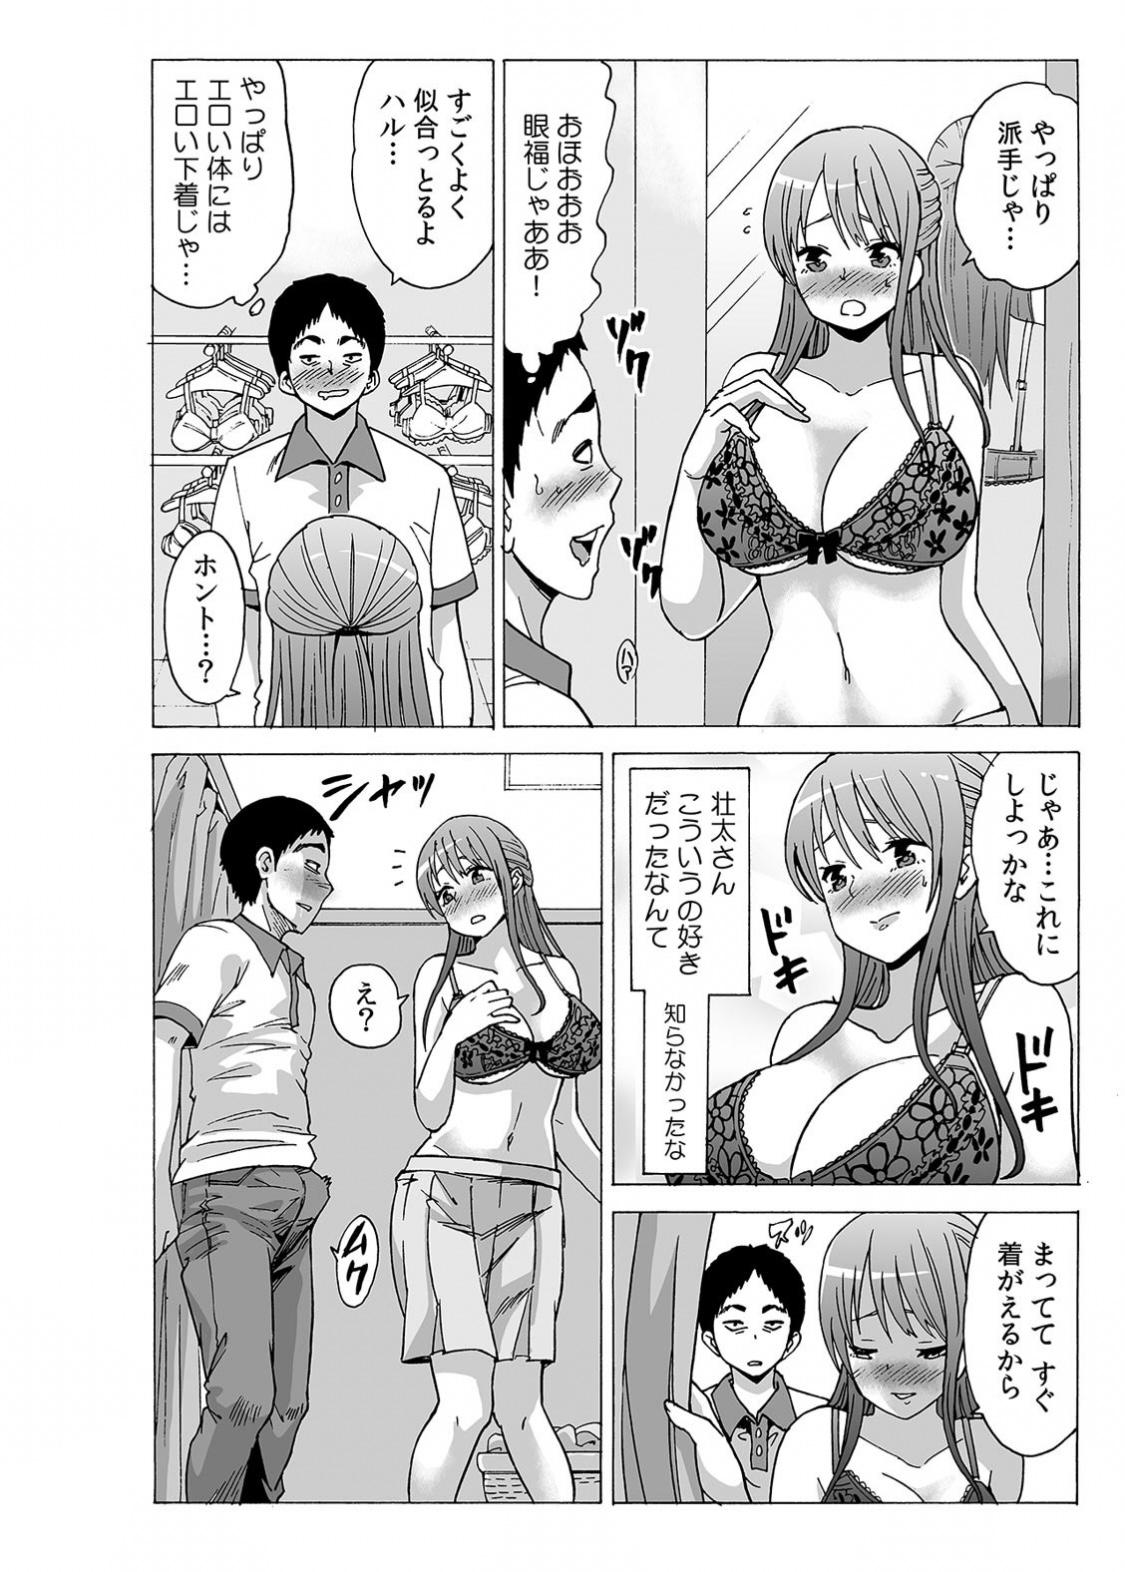 Amature Porn [Motaro / Akahige] My first partner is ... my father-in-law!? 2 Dorm - Page 2